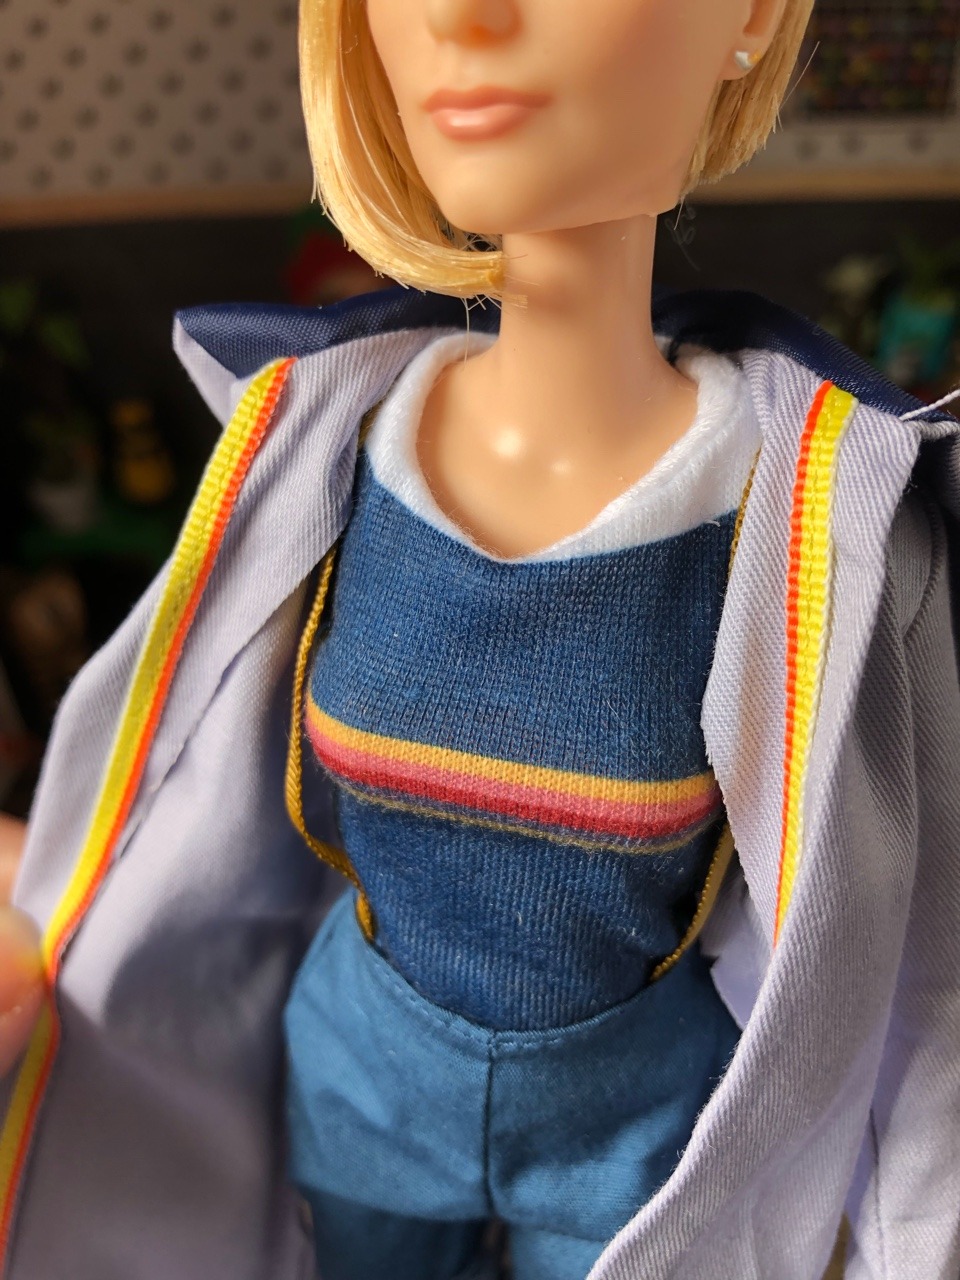 dr who barbie doll